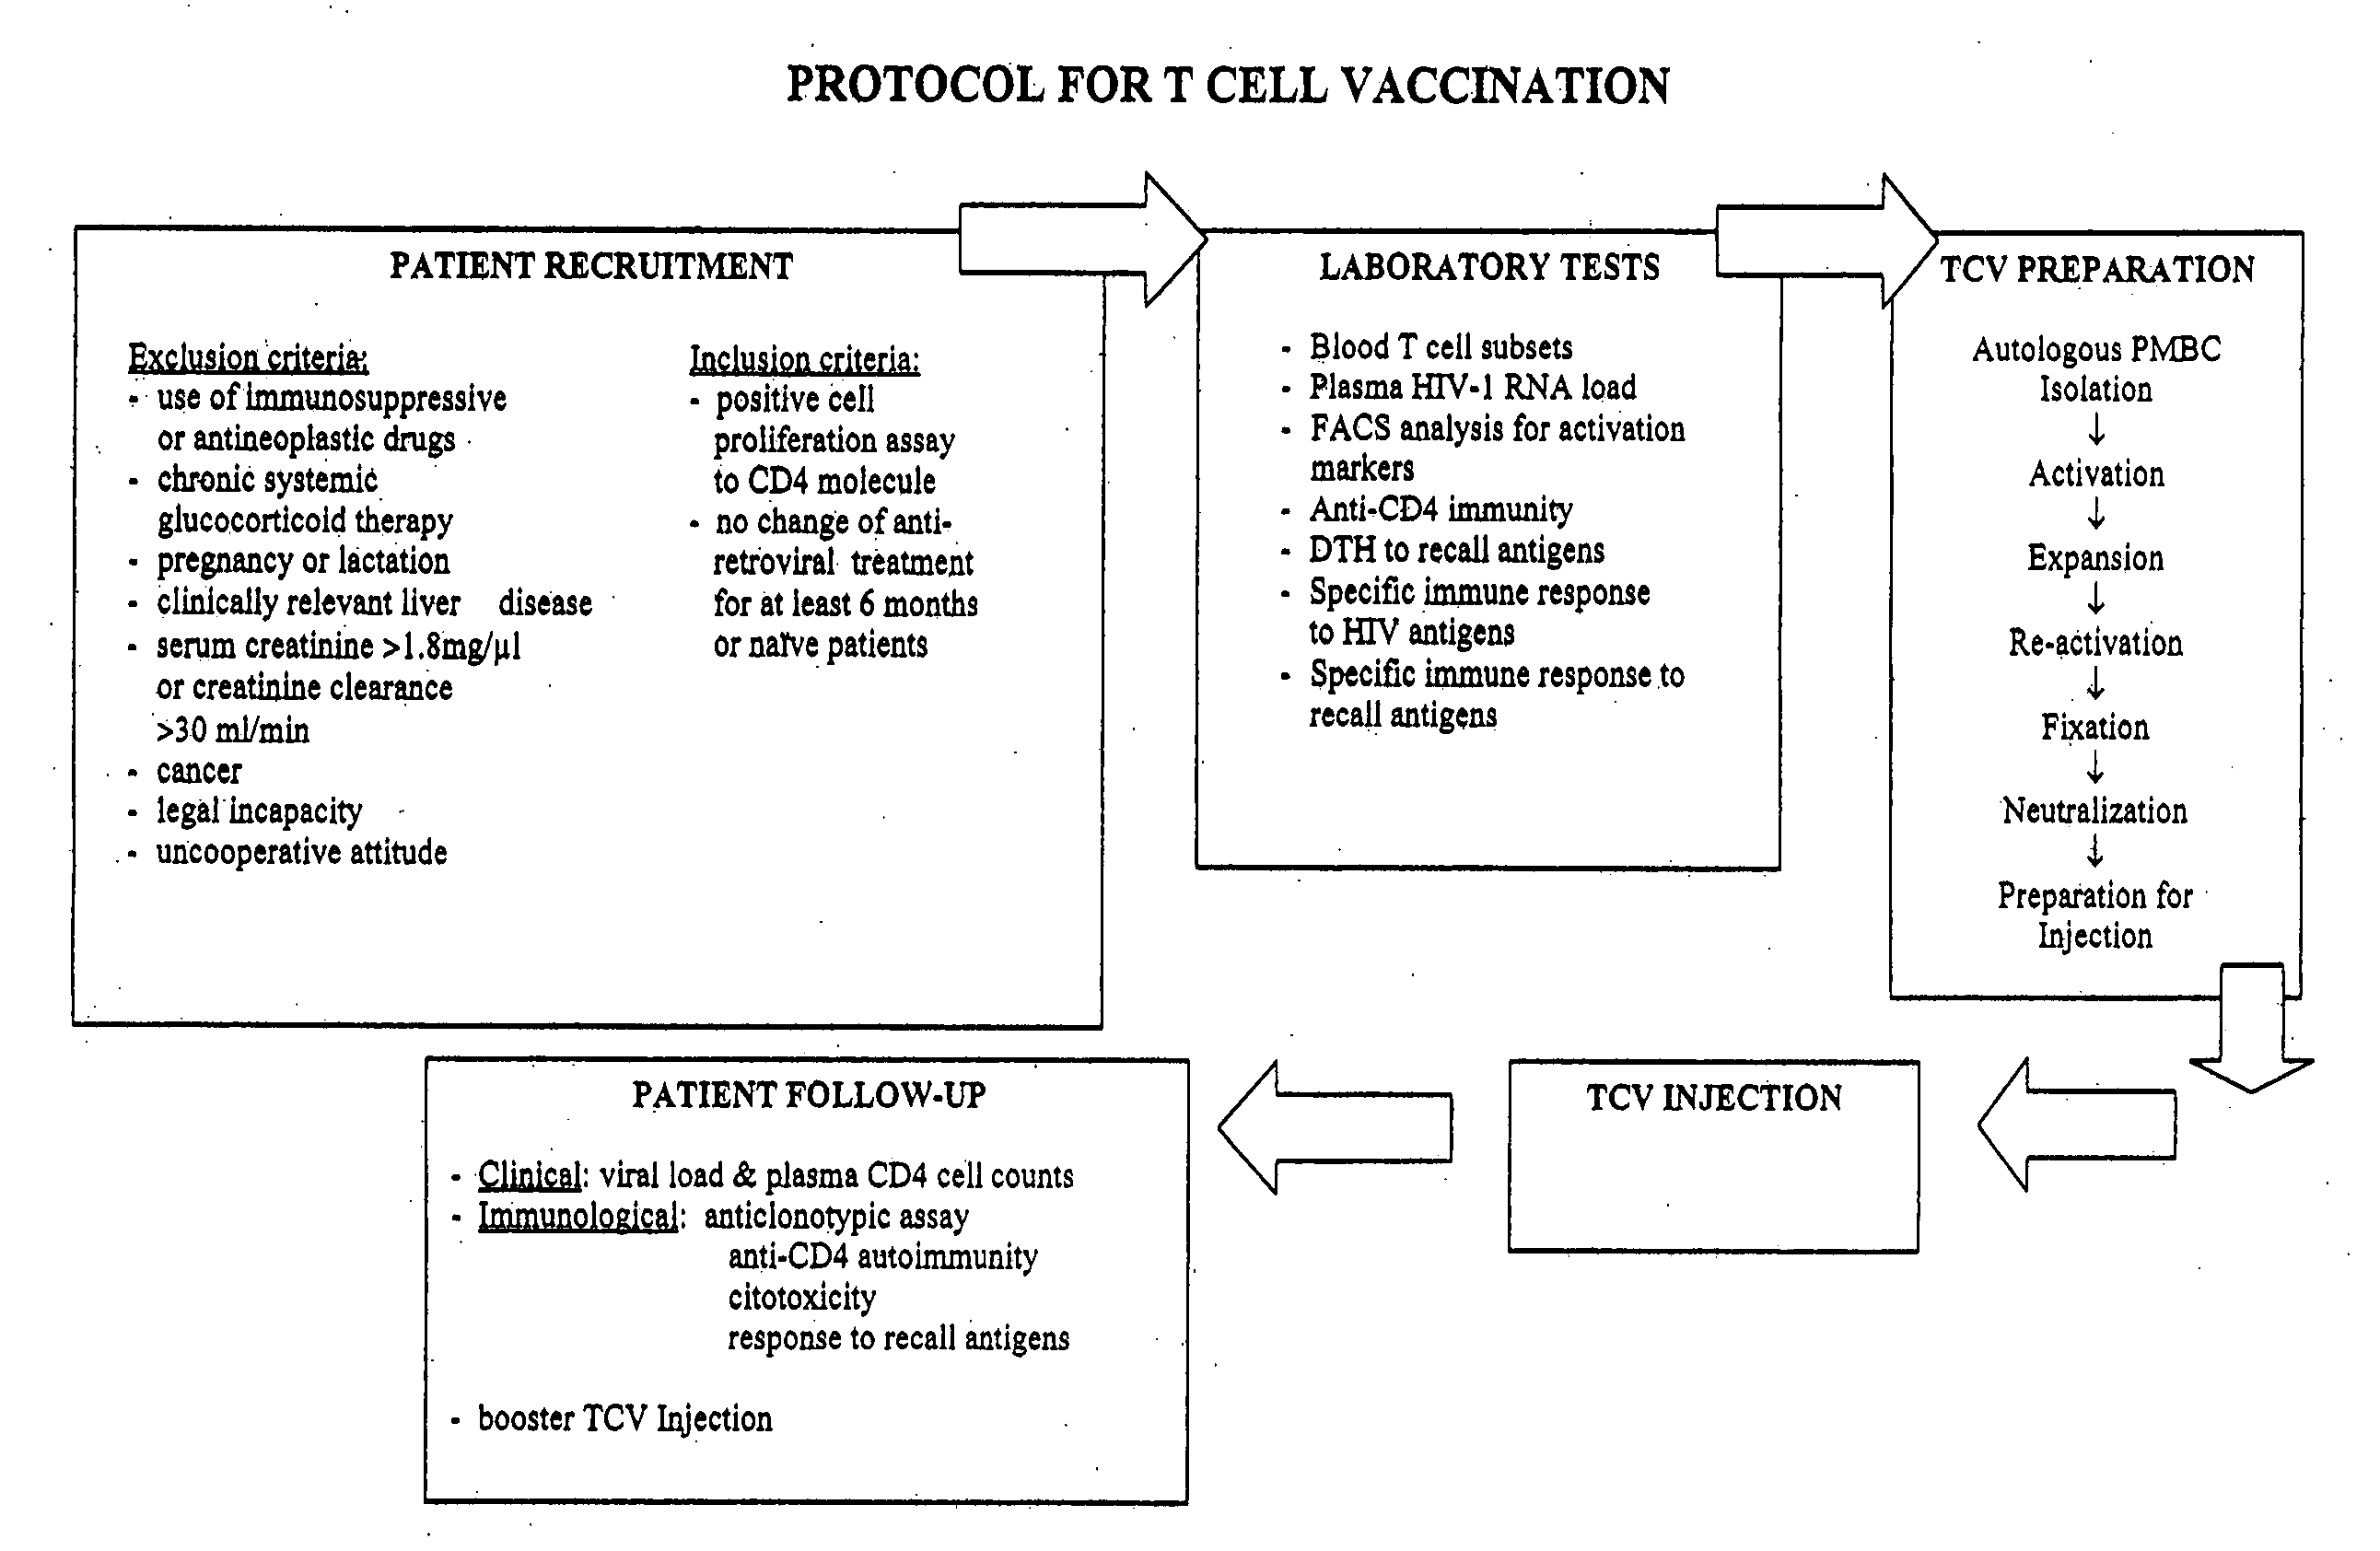 T-cell vaccination in the treatment of HIV infection